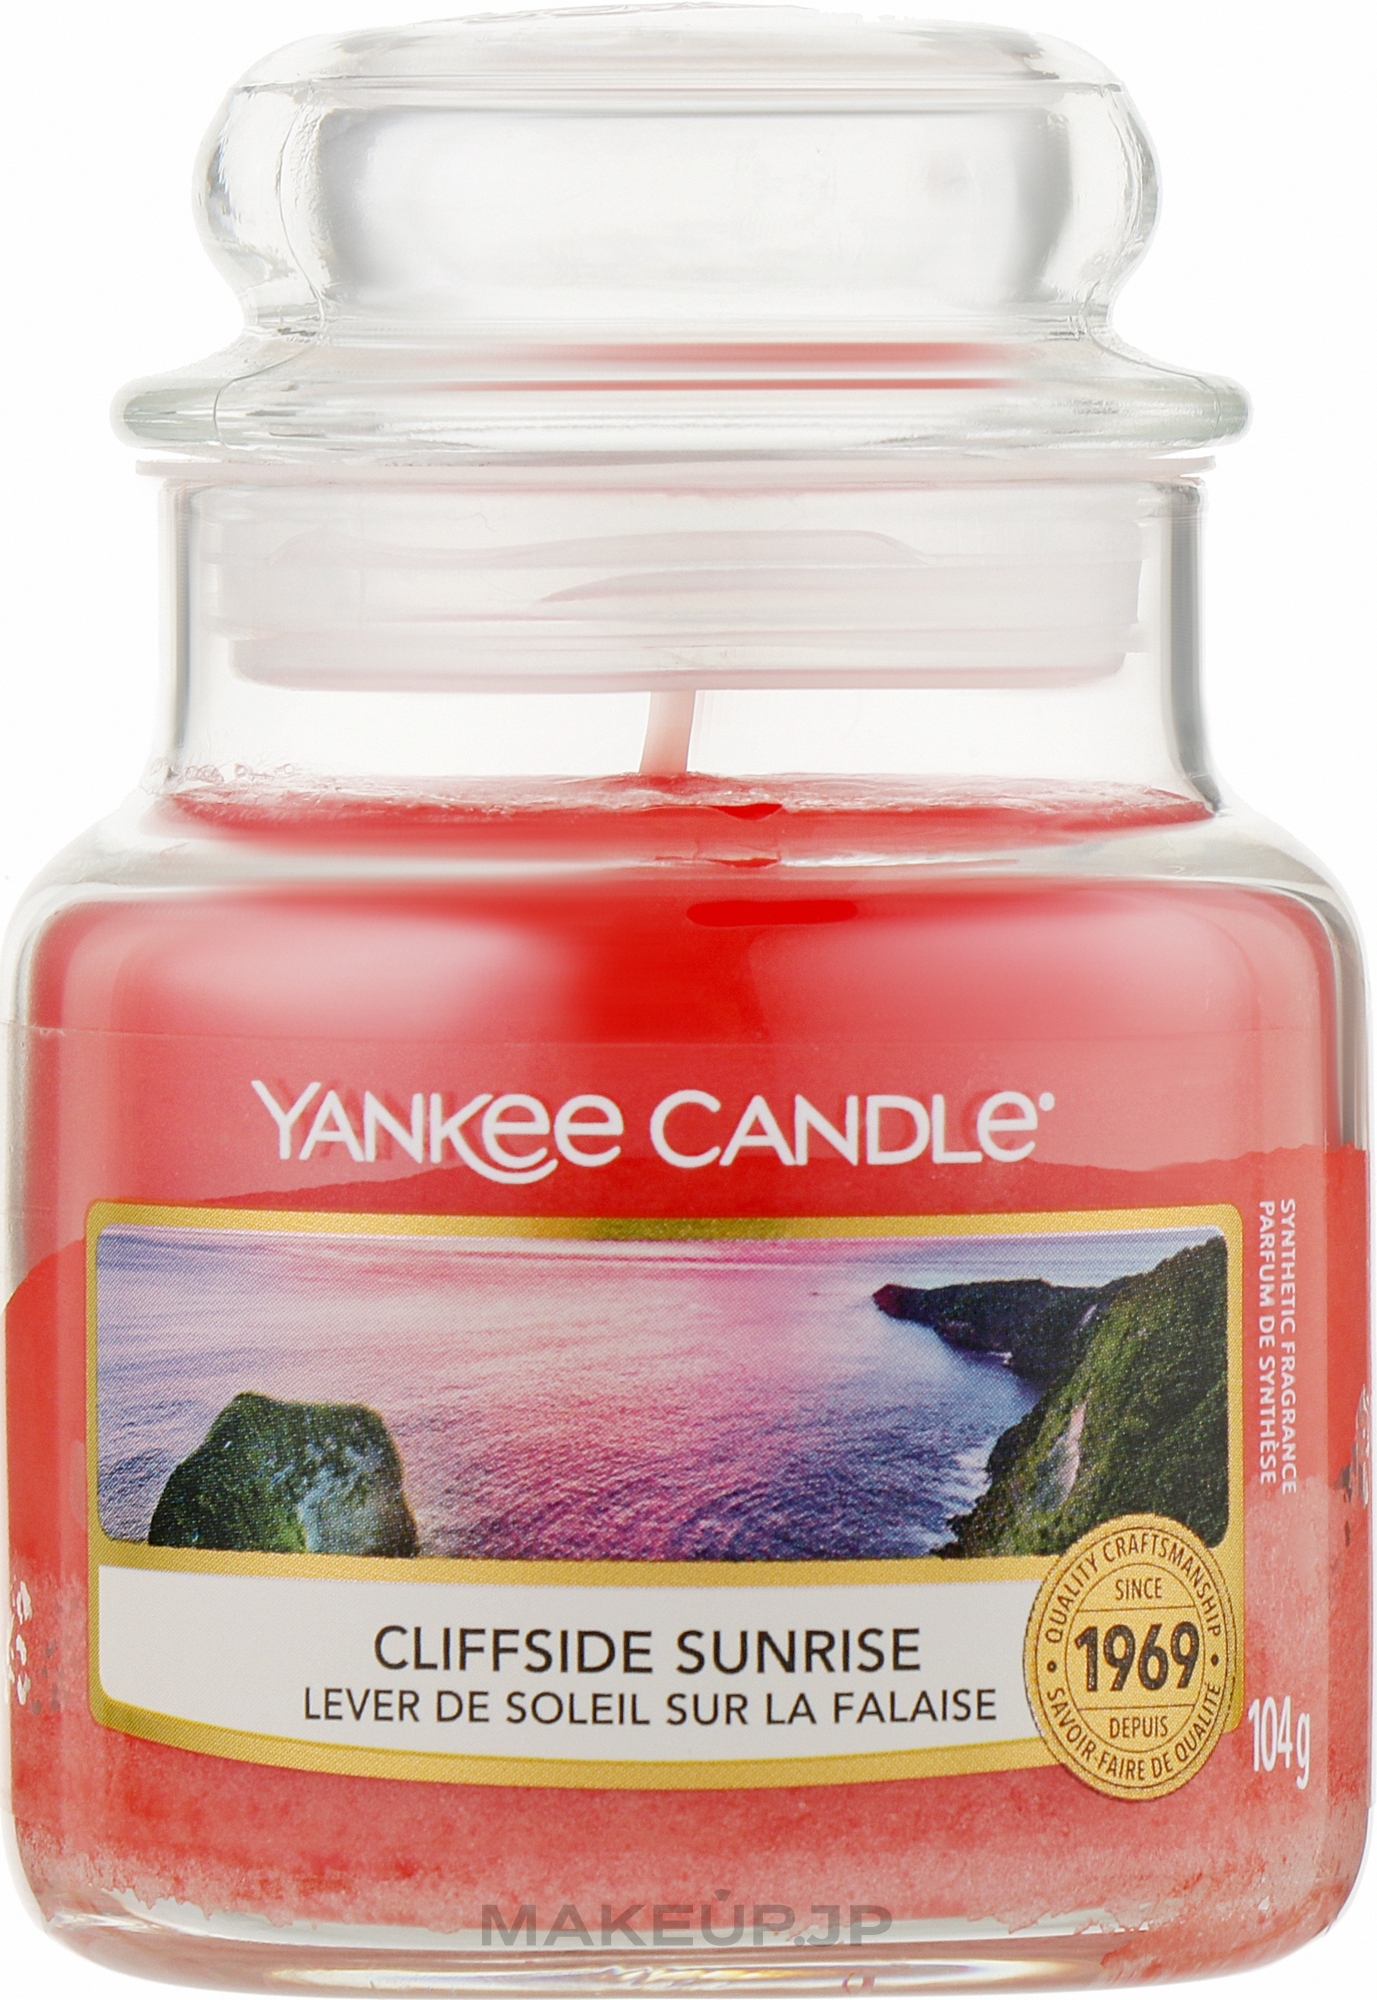 Scented Candle in Jar - Yankee Candle Classic Cliffside Sunrise — photo 104 g